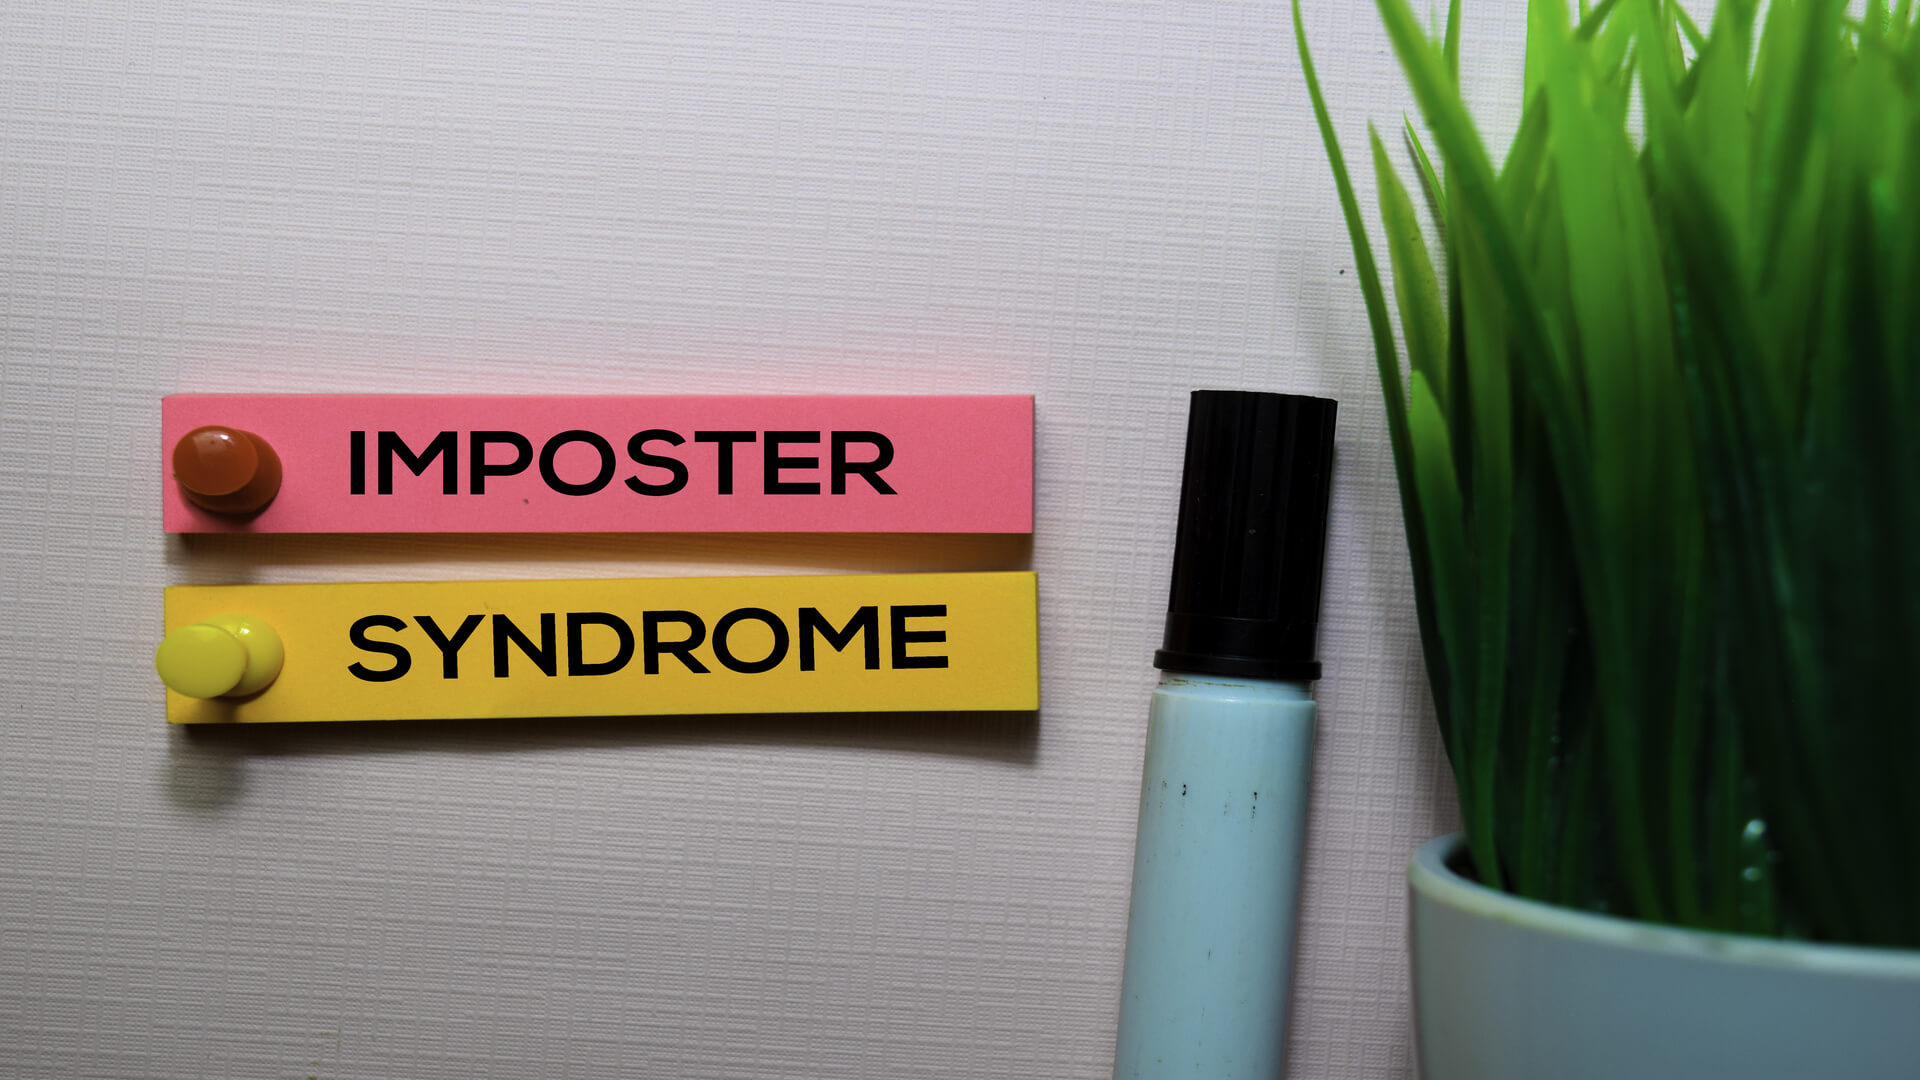 How spot and Deal with Imposter Syndrome